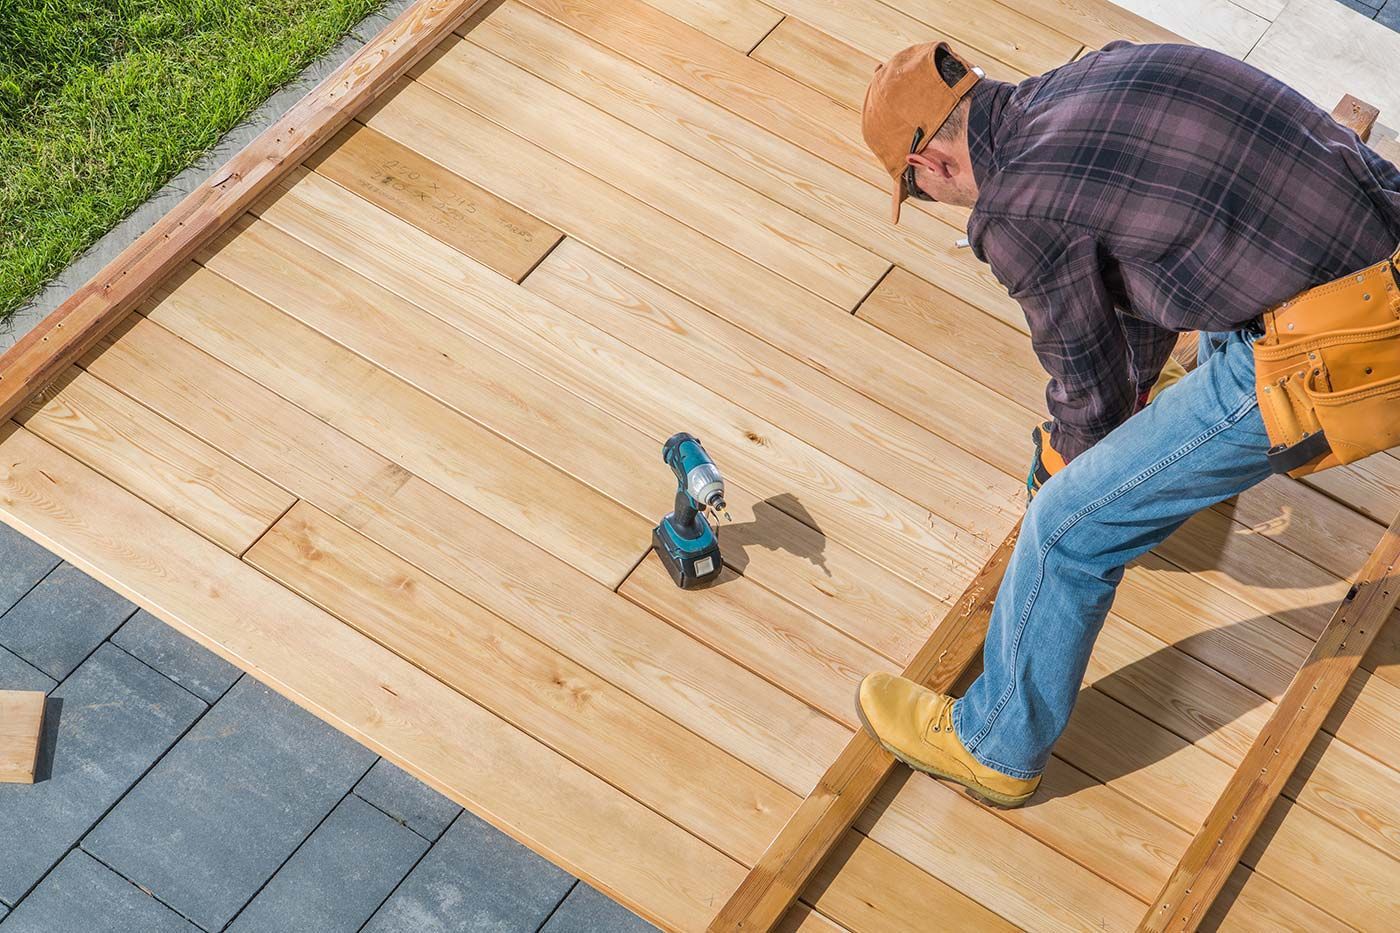 A man is working on a wooden deck with a drill .